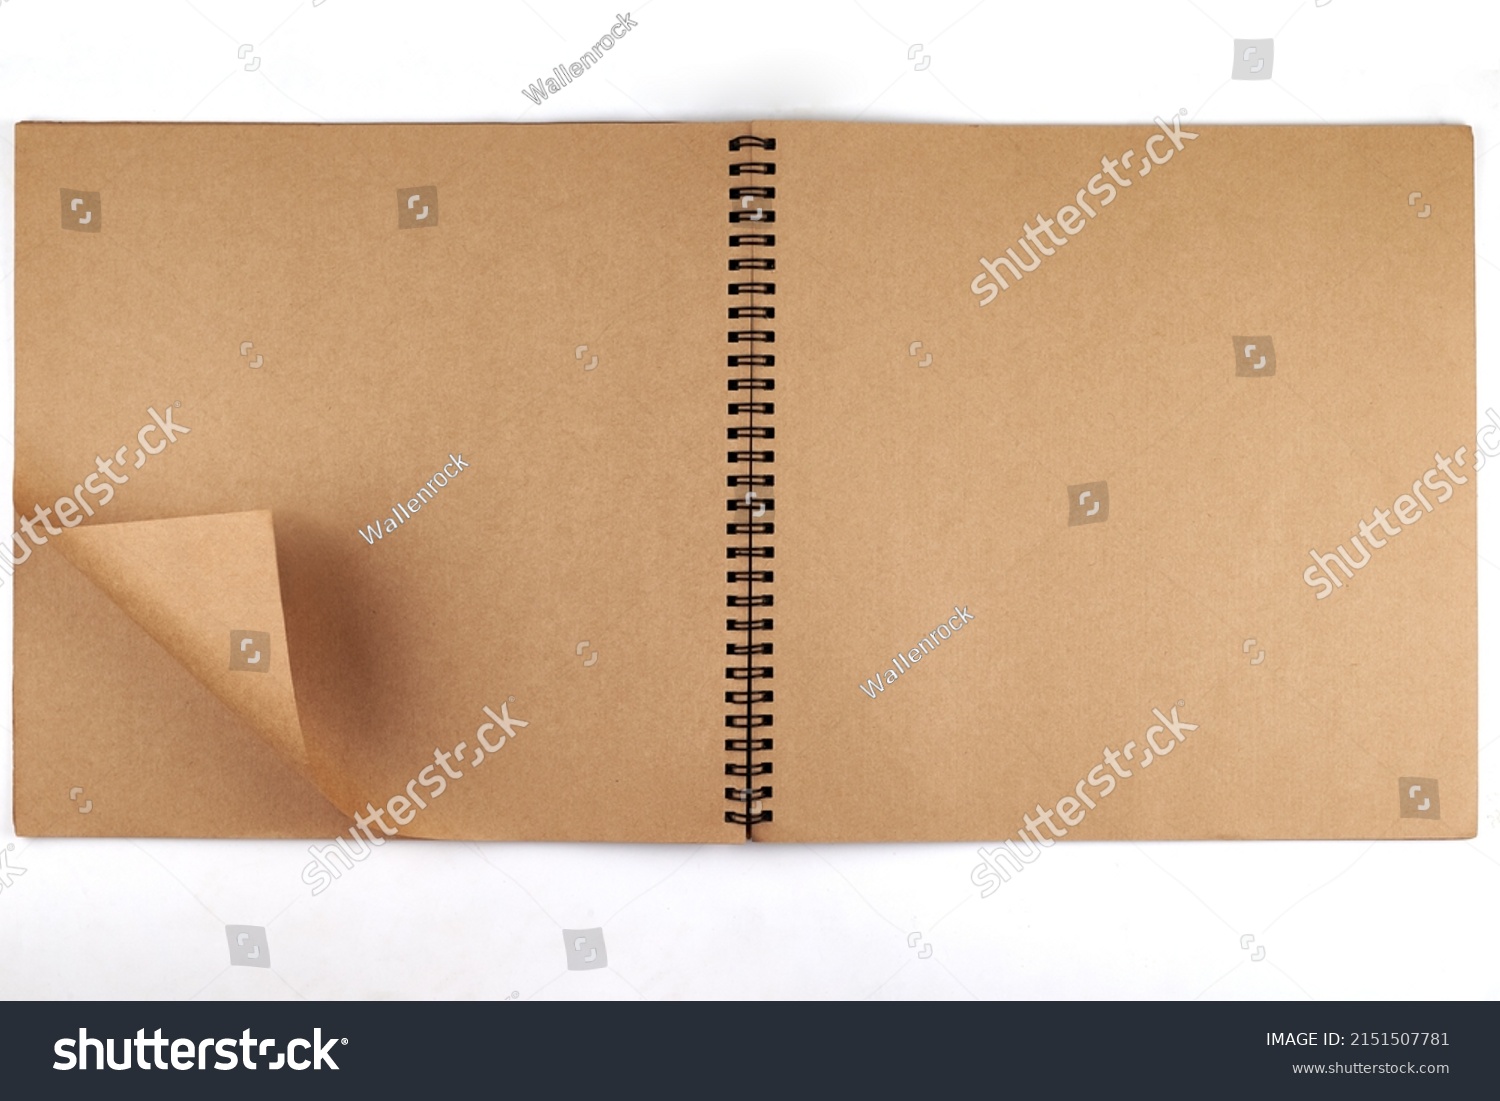 Opened album with sepia flipped pages and metal binding isolated on white background. #2151507781